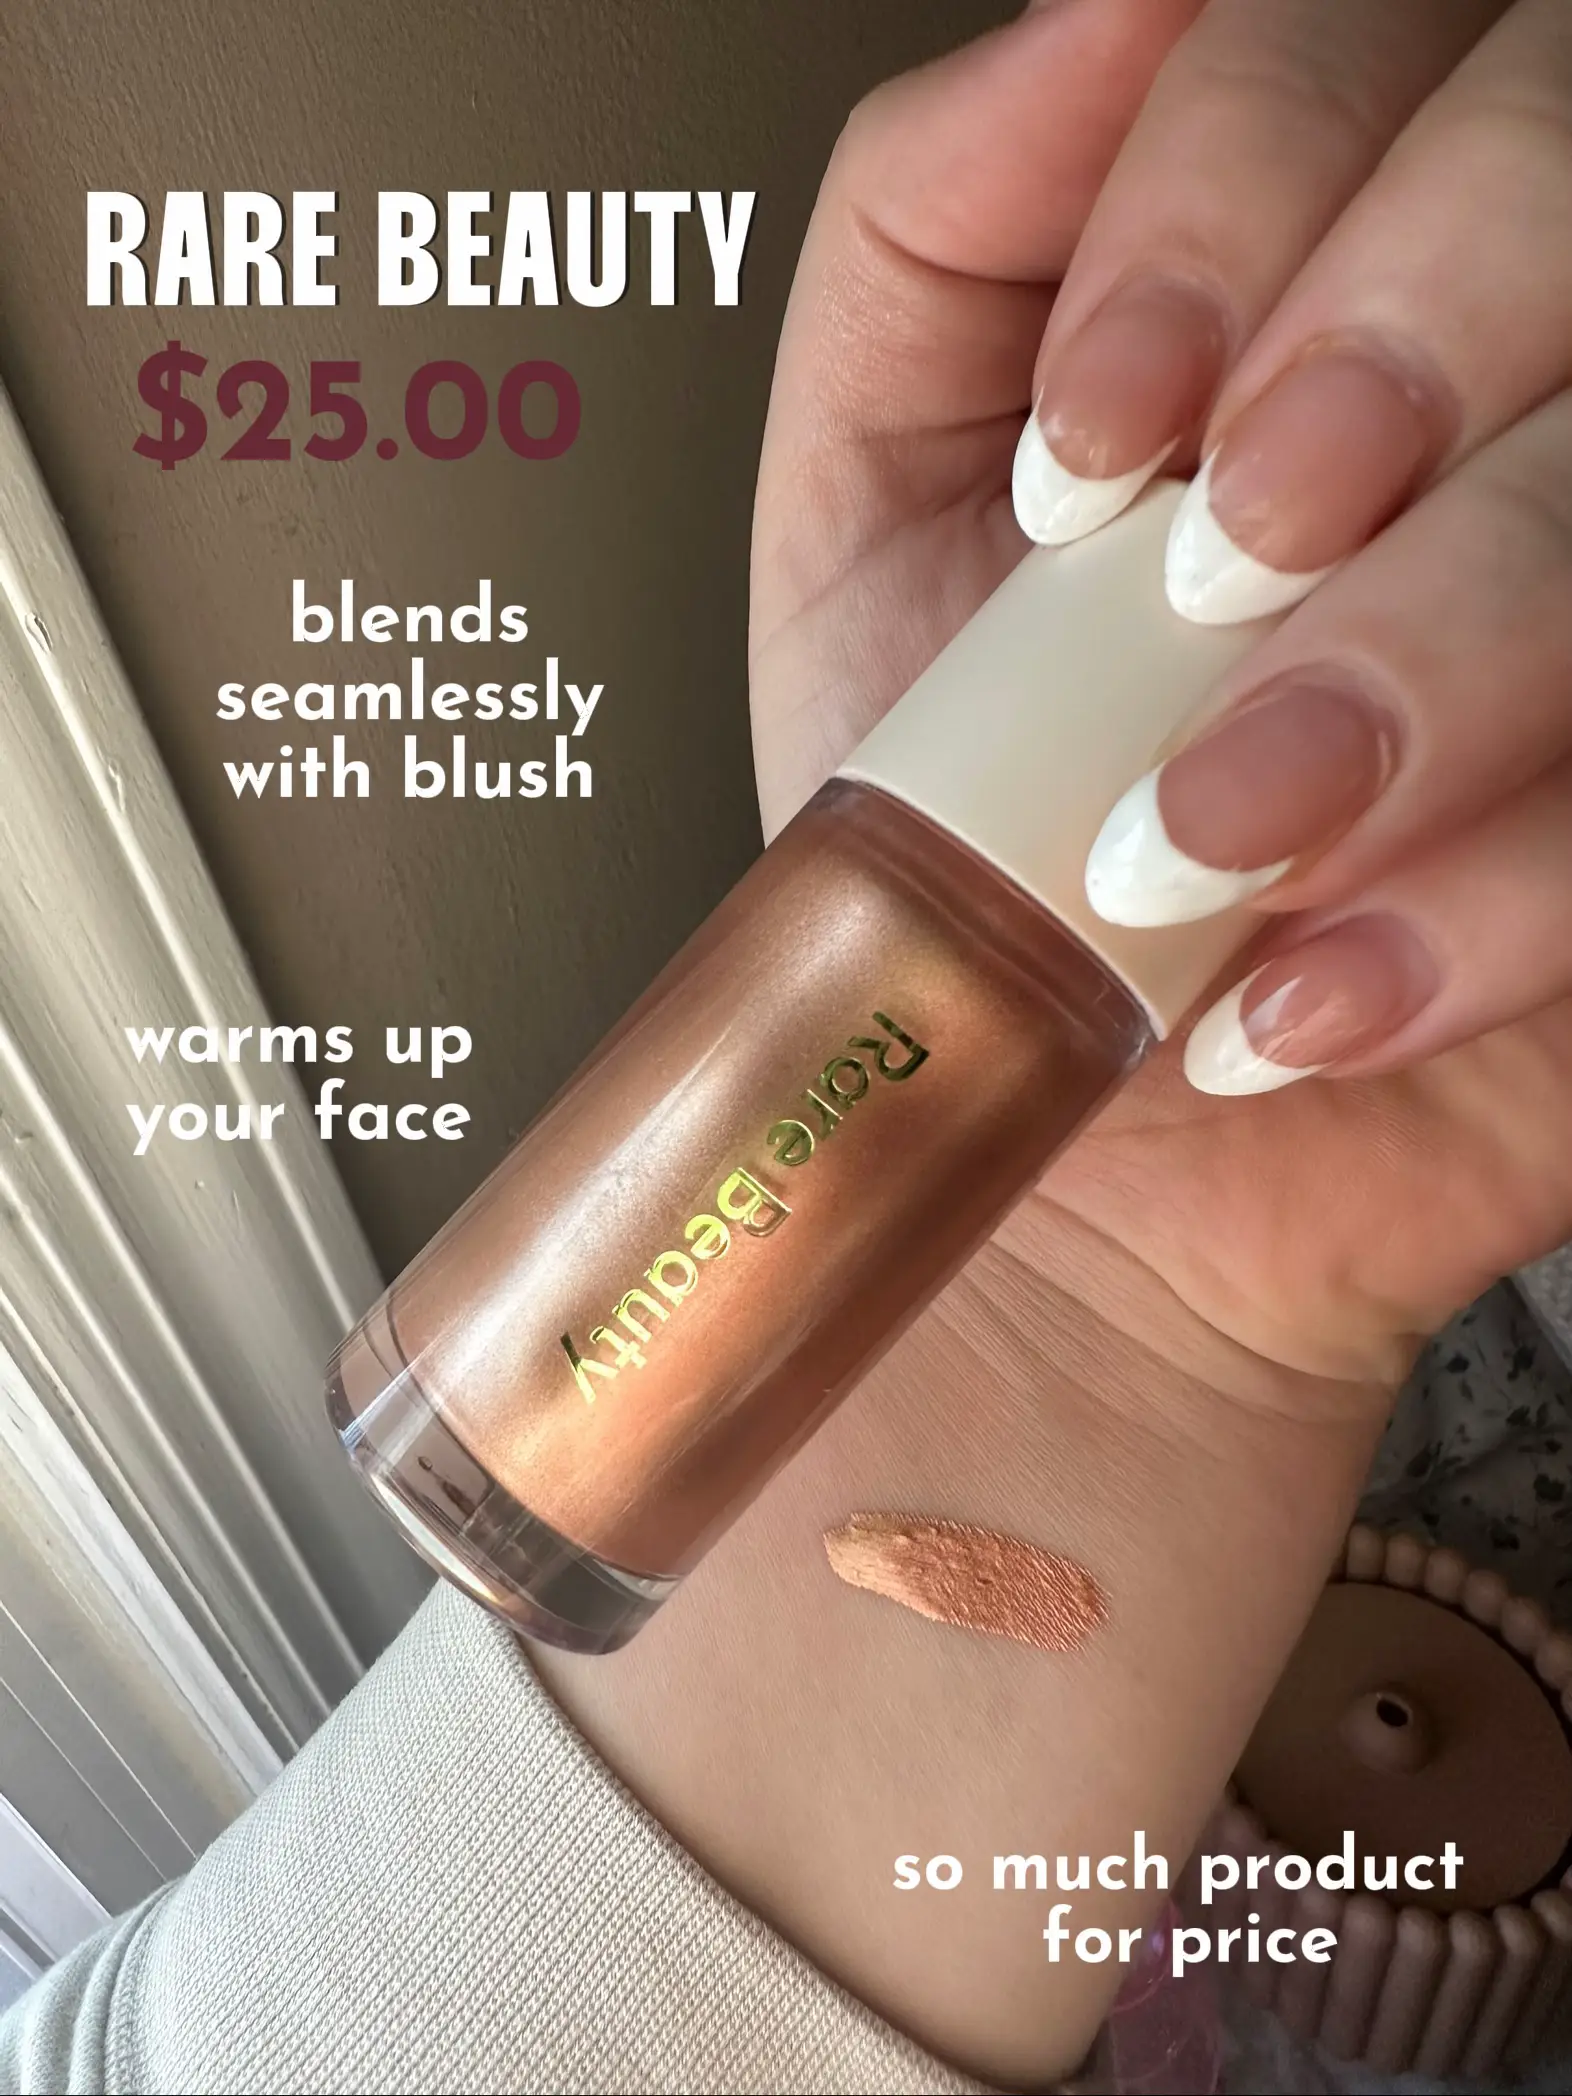  A hand holding a bottle of Rare Beauty blush.